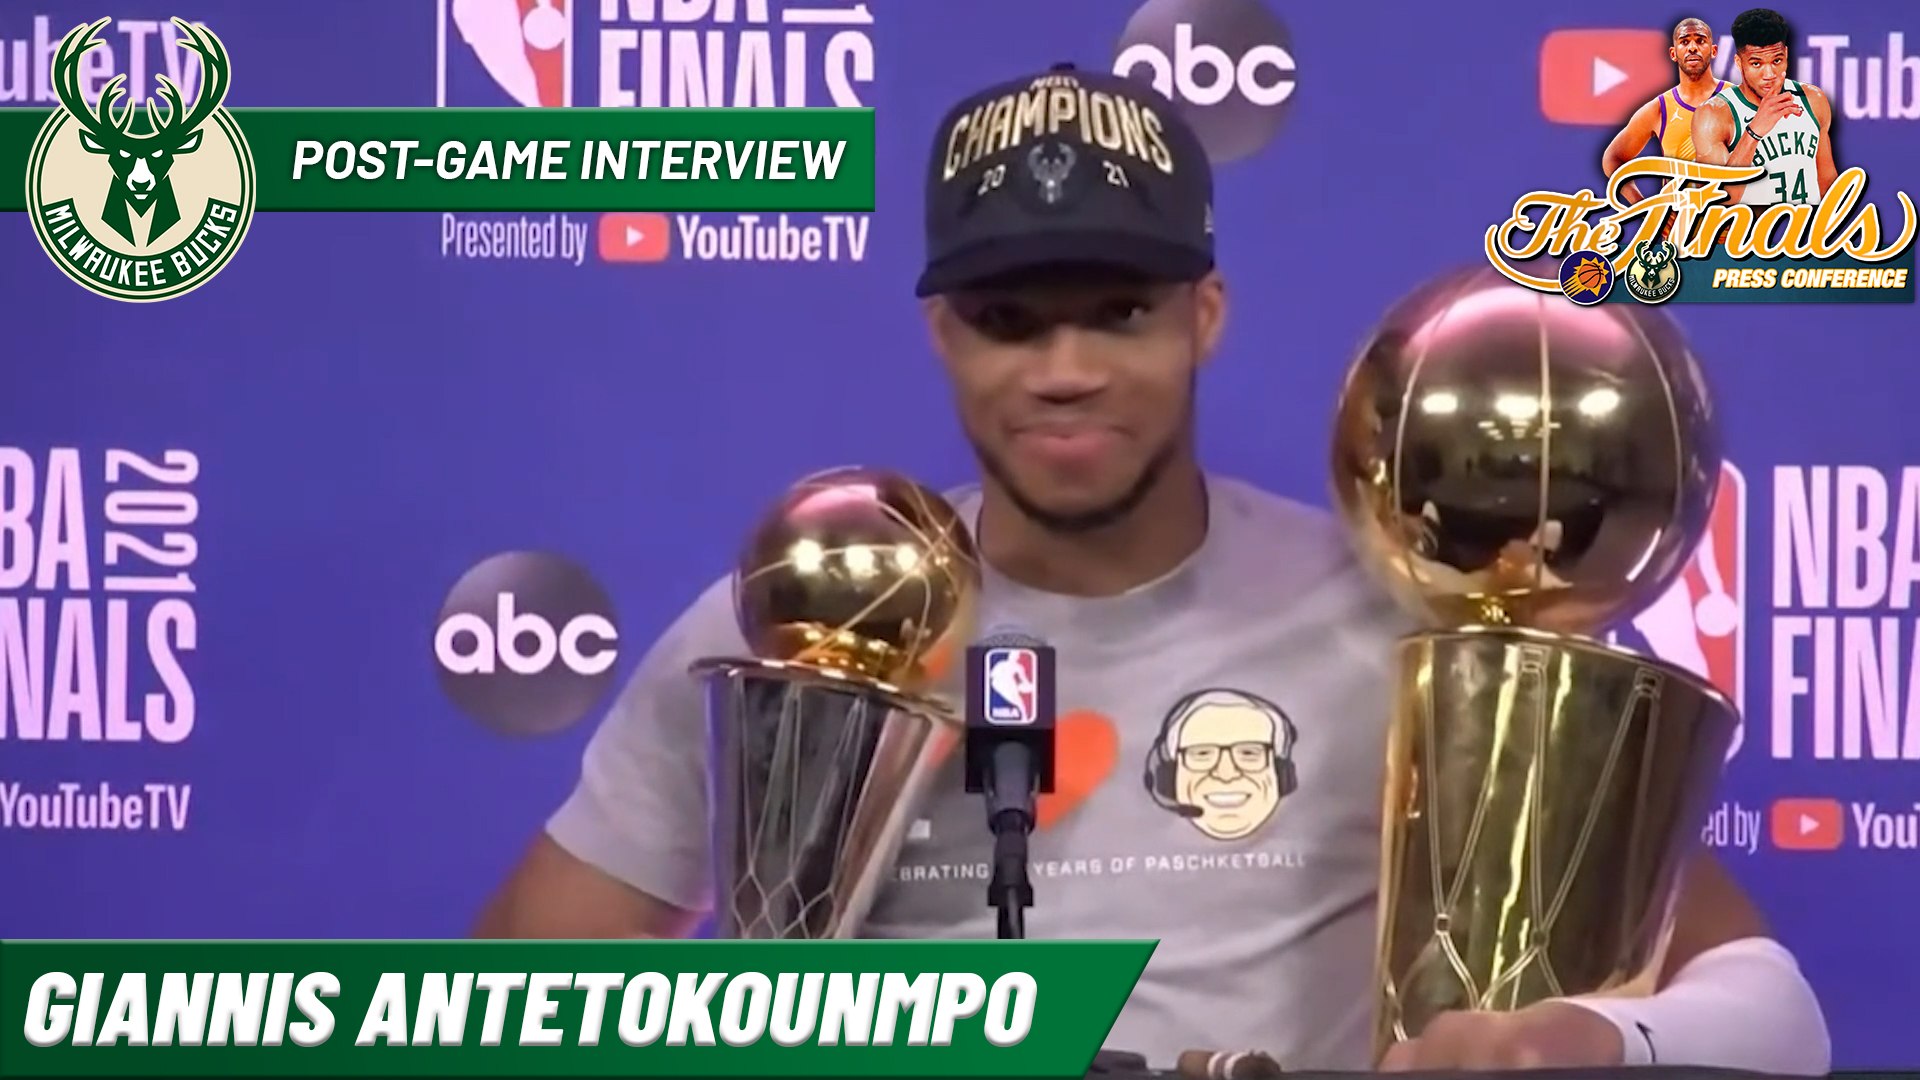 Giannis Antetokounmpo after winning 2021 NBA Championship and Finals MVP